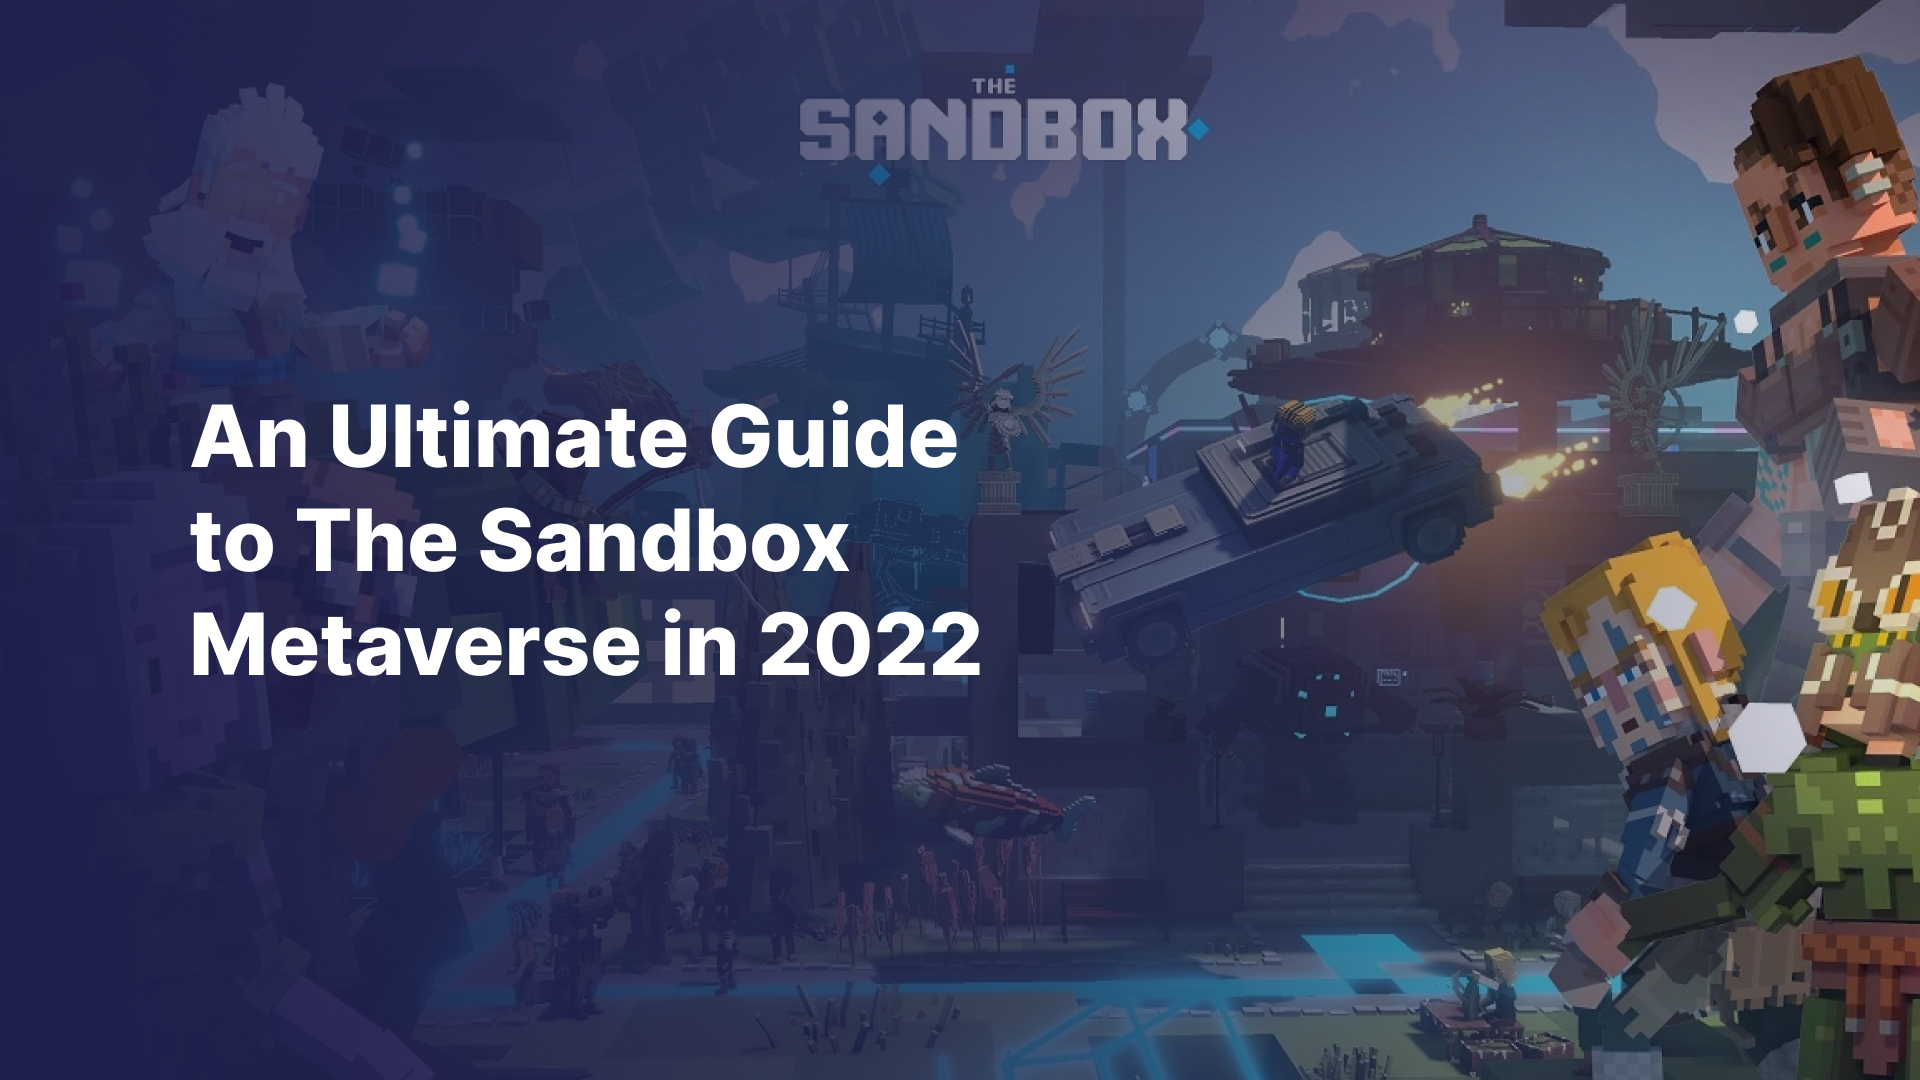 An Ultimate Guide to The Sandbox Metaverse in 2022